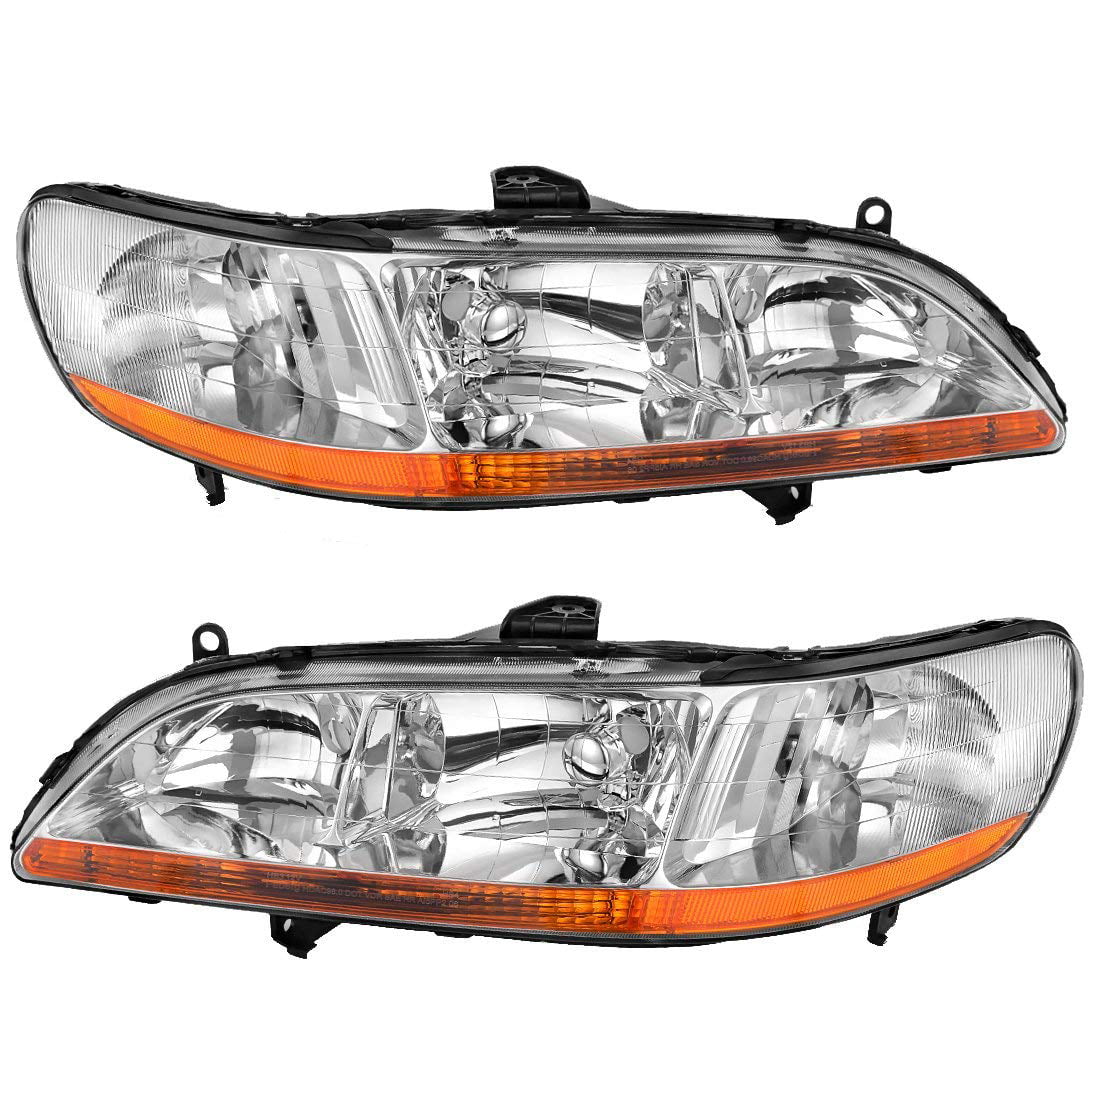 One-Year Warranty Passenger And Driver Side Headlight Assembly for 1998 1999 2000 2001 2002 Honda Accord Headlamp Replacement Chrome Housing Amber Reflector AUTOSAVER88 4333012325